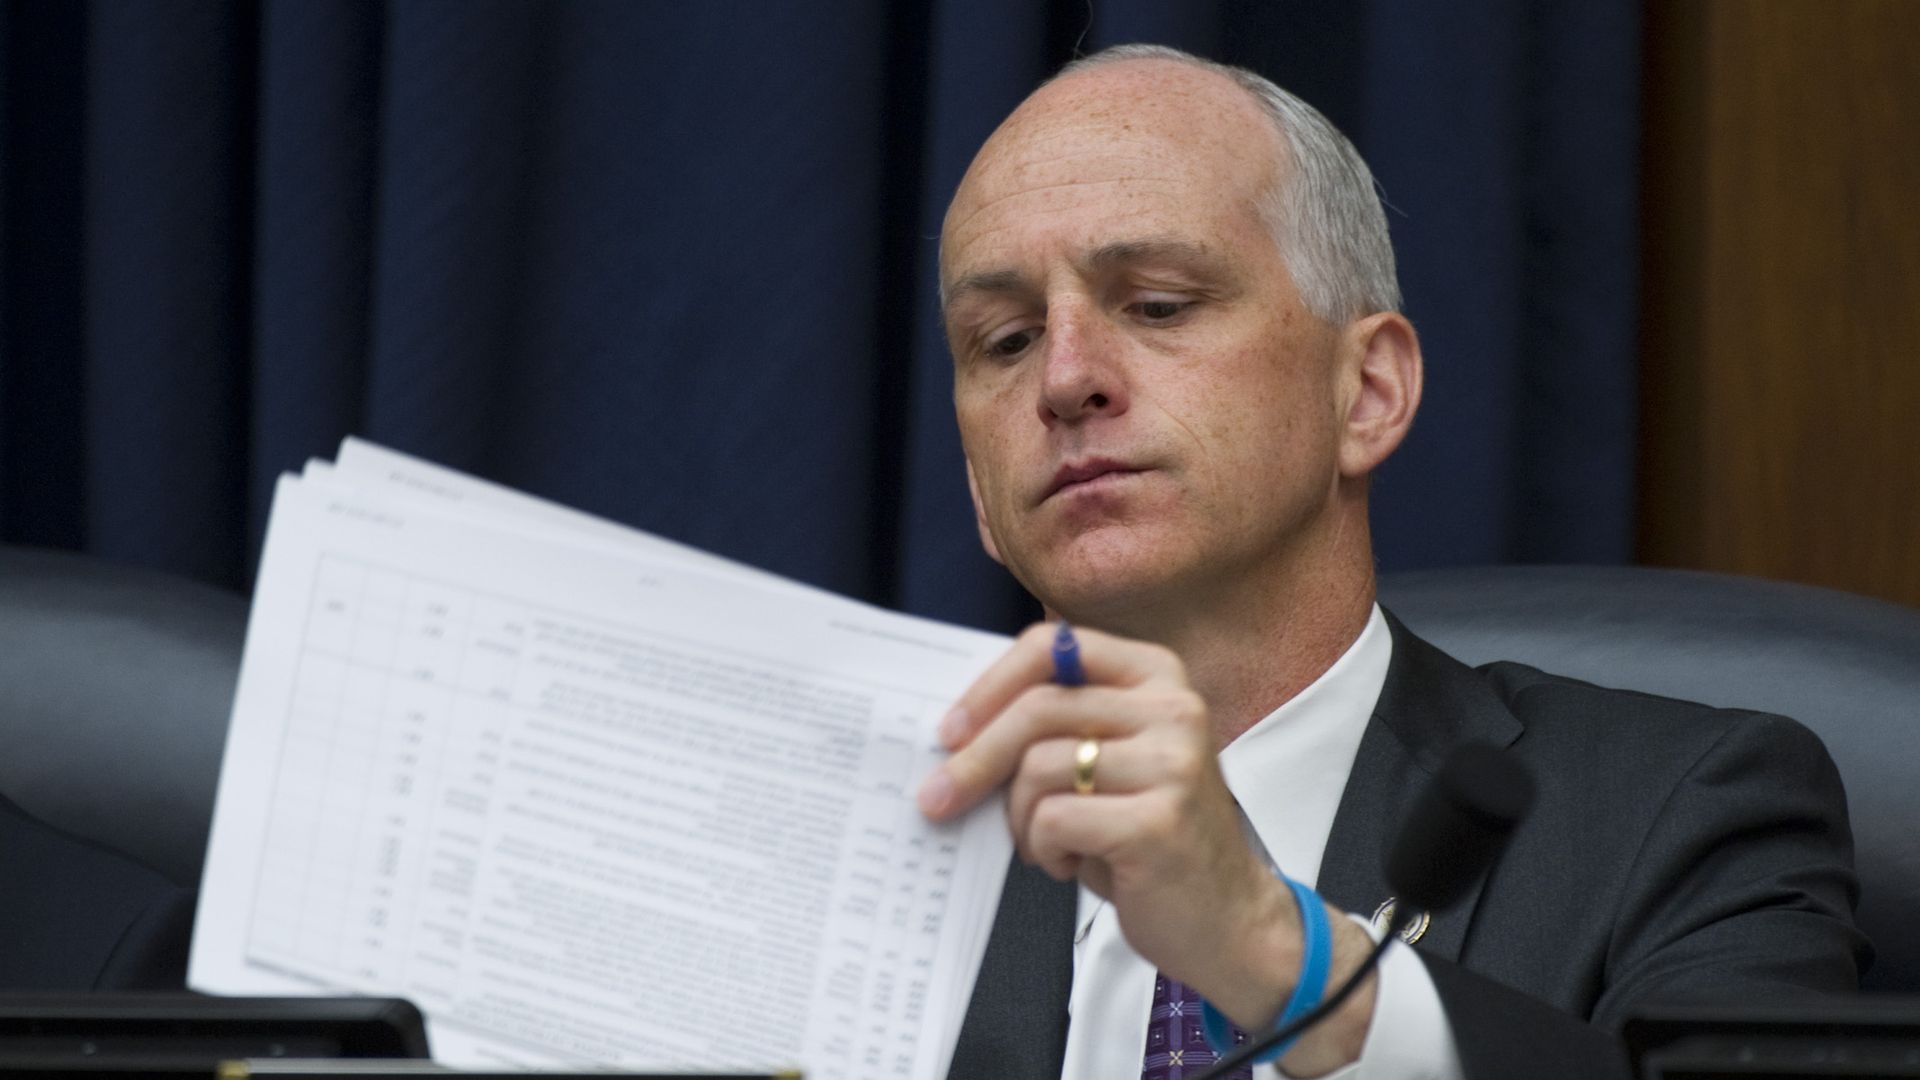 House Armed Services Committee Chairman Adam Smith is seen reviewing some papers.